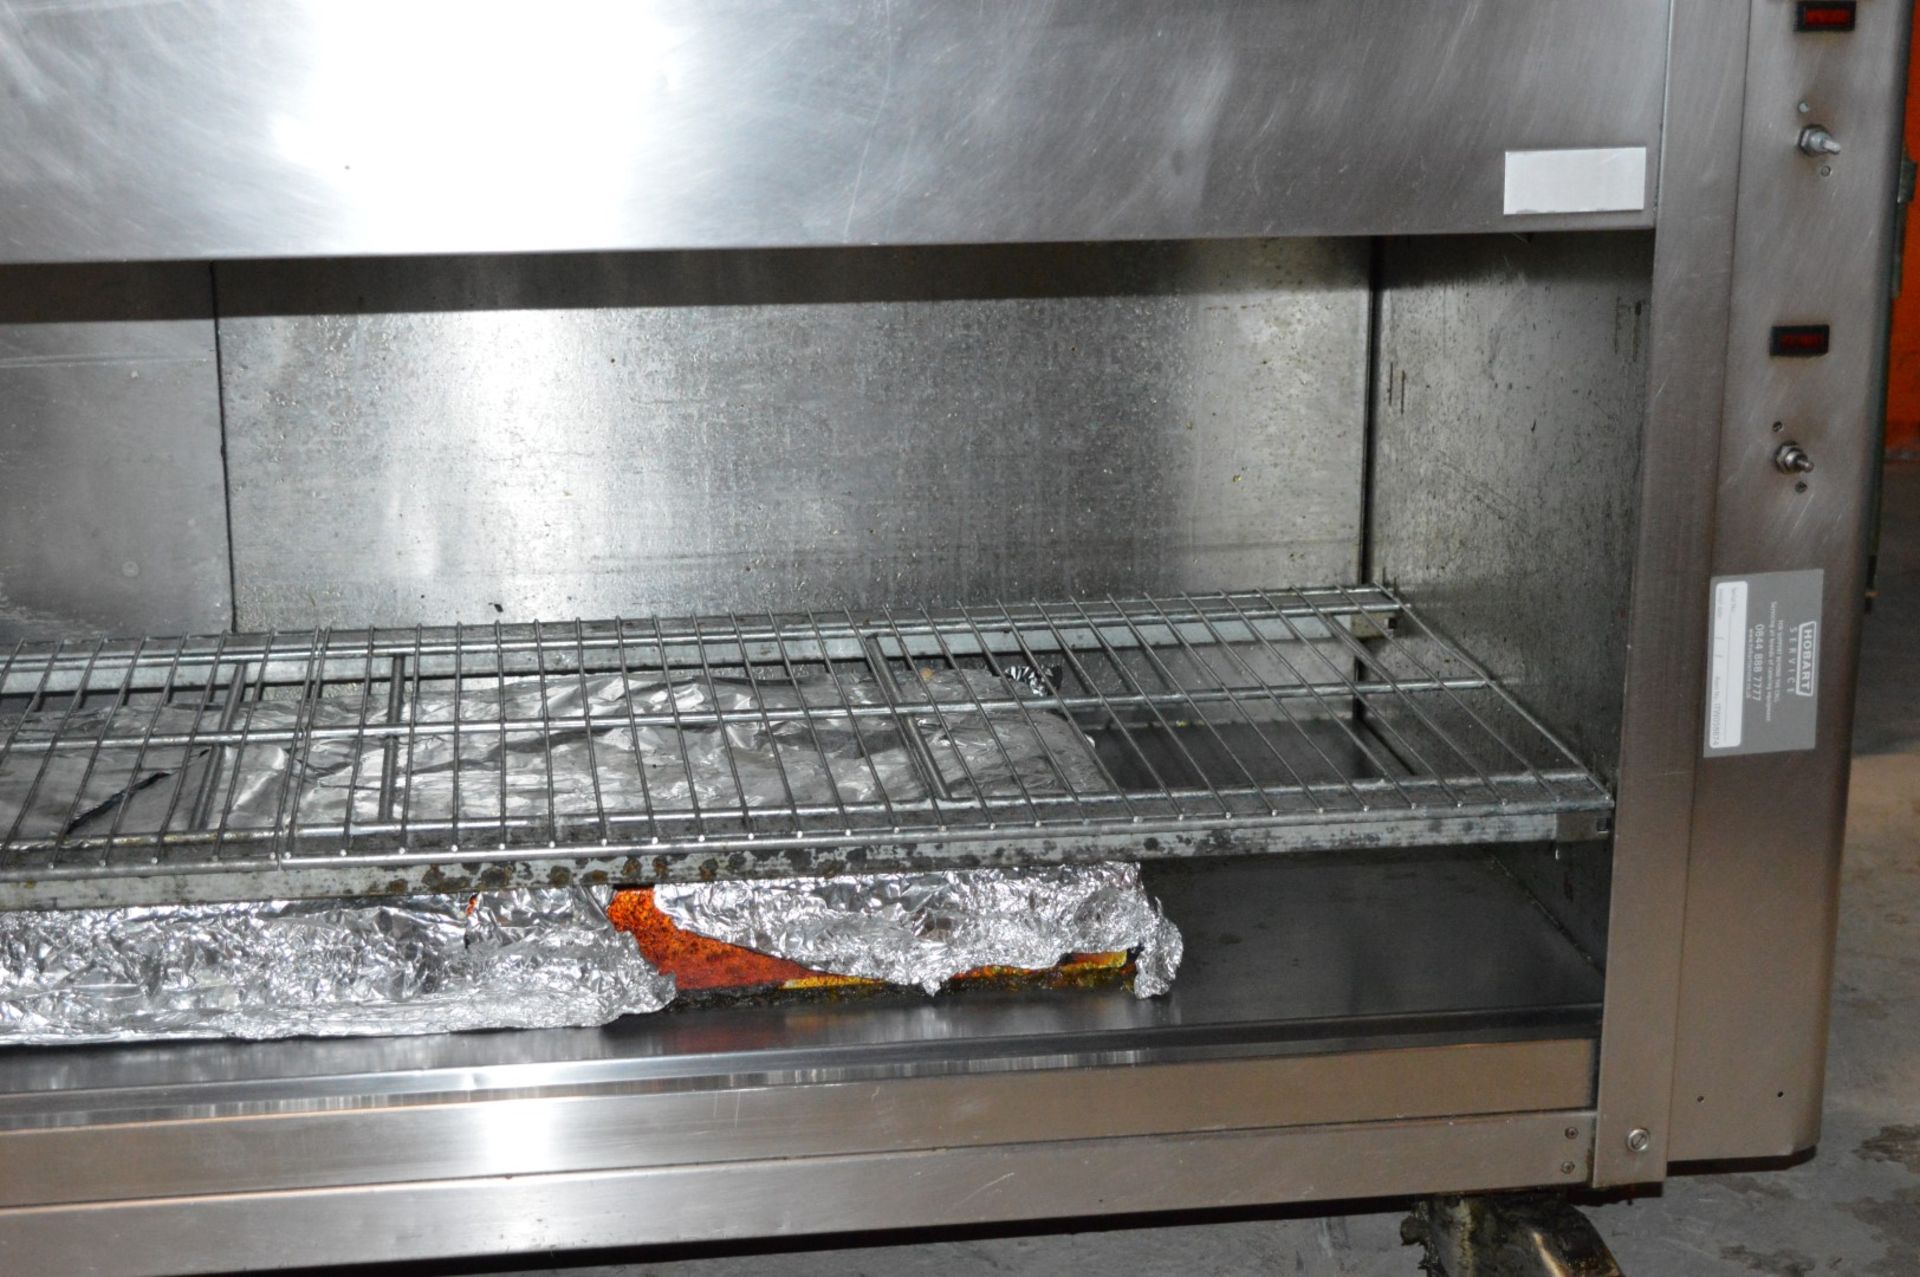 1 x Stainless Steel Heated Pass Through Gantry With Heated Food Well, Food Warming Cupboards, - Image 11 of 12